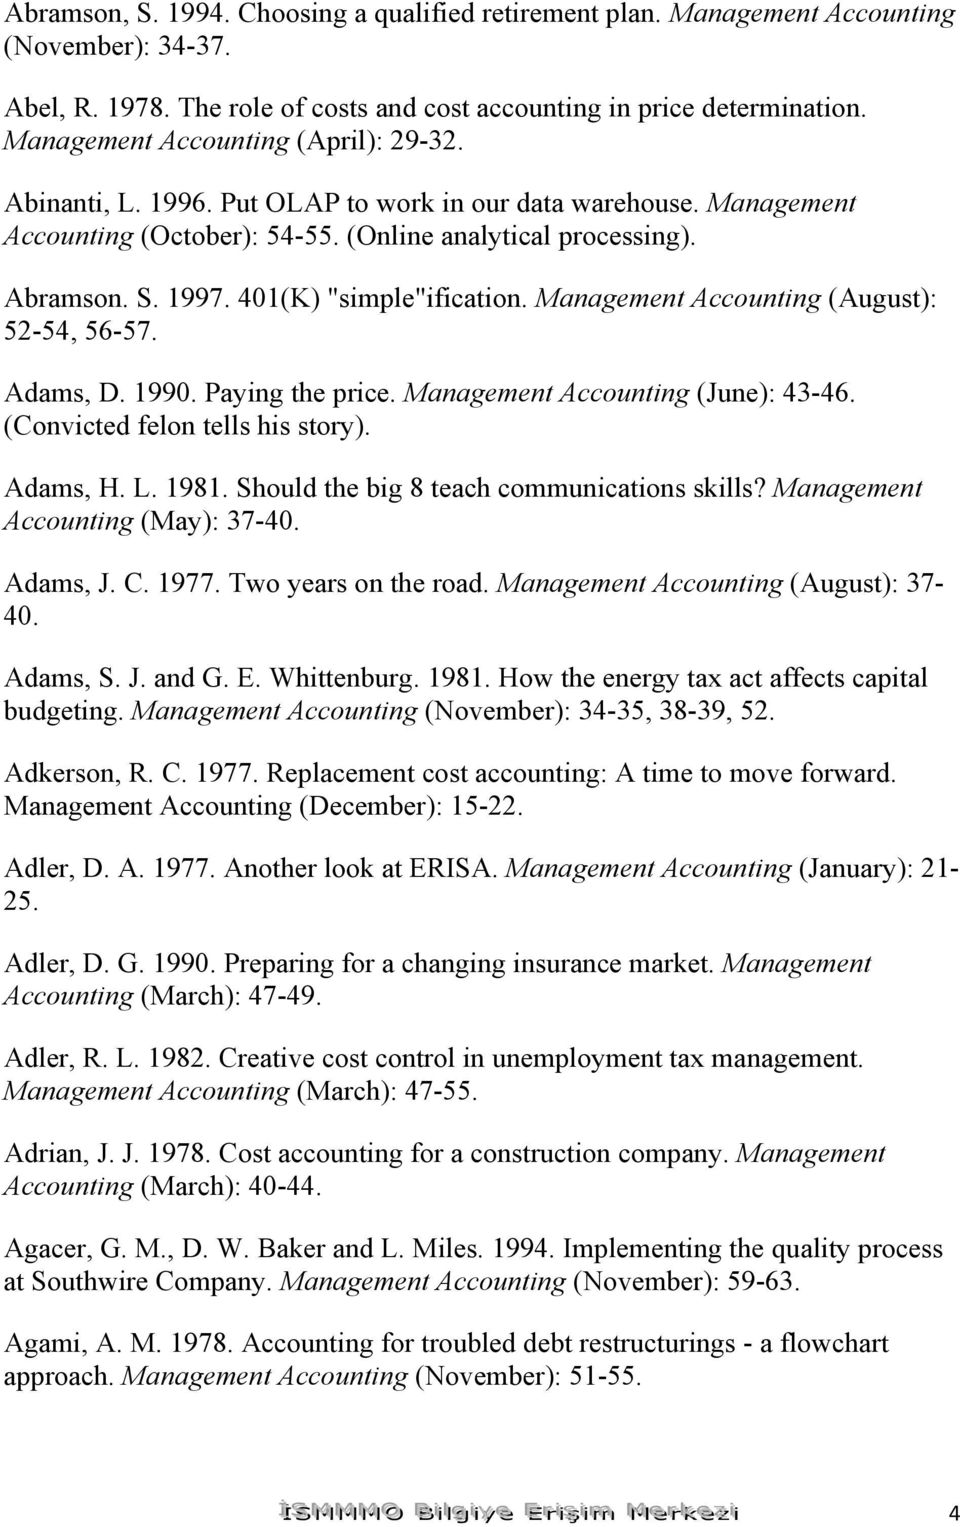 401(K) "simple"ification. Management Accounting (August): 52-54, 56-57. Adams, D. 1990. Paying the price. Management Accounting (June): 43-46. (Convicted felon tells his story). Adams, H. L. 1981.